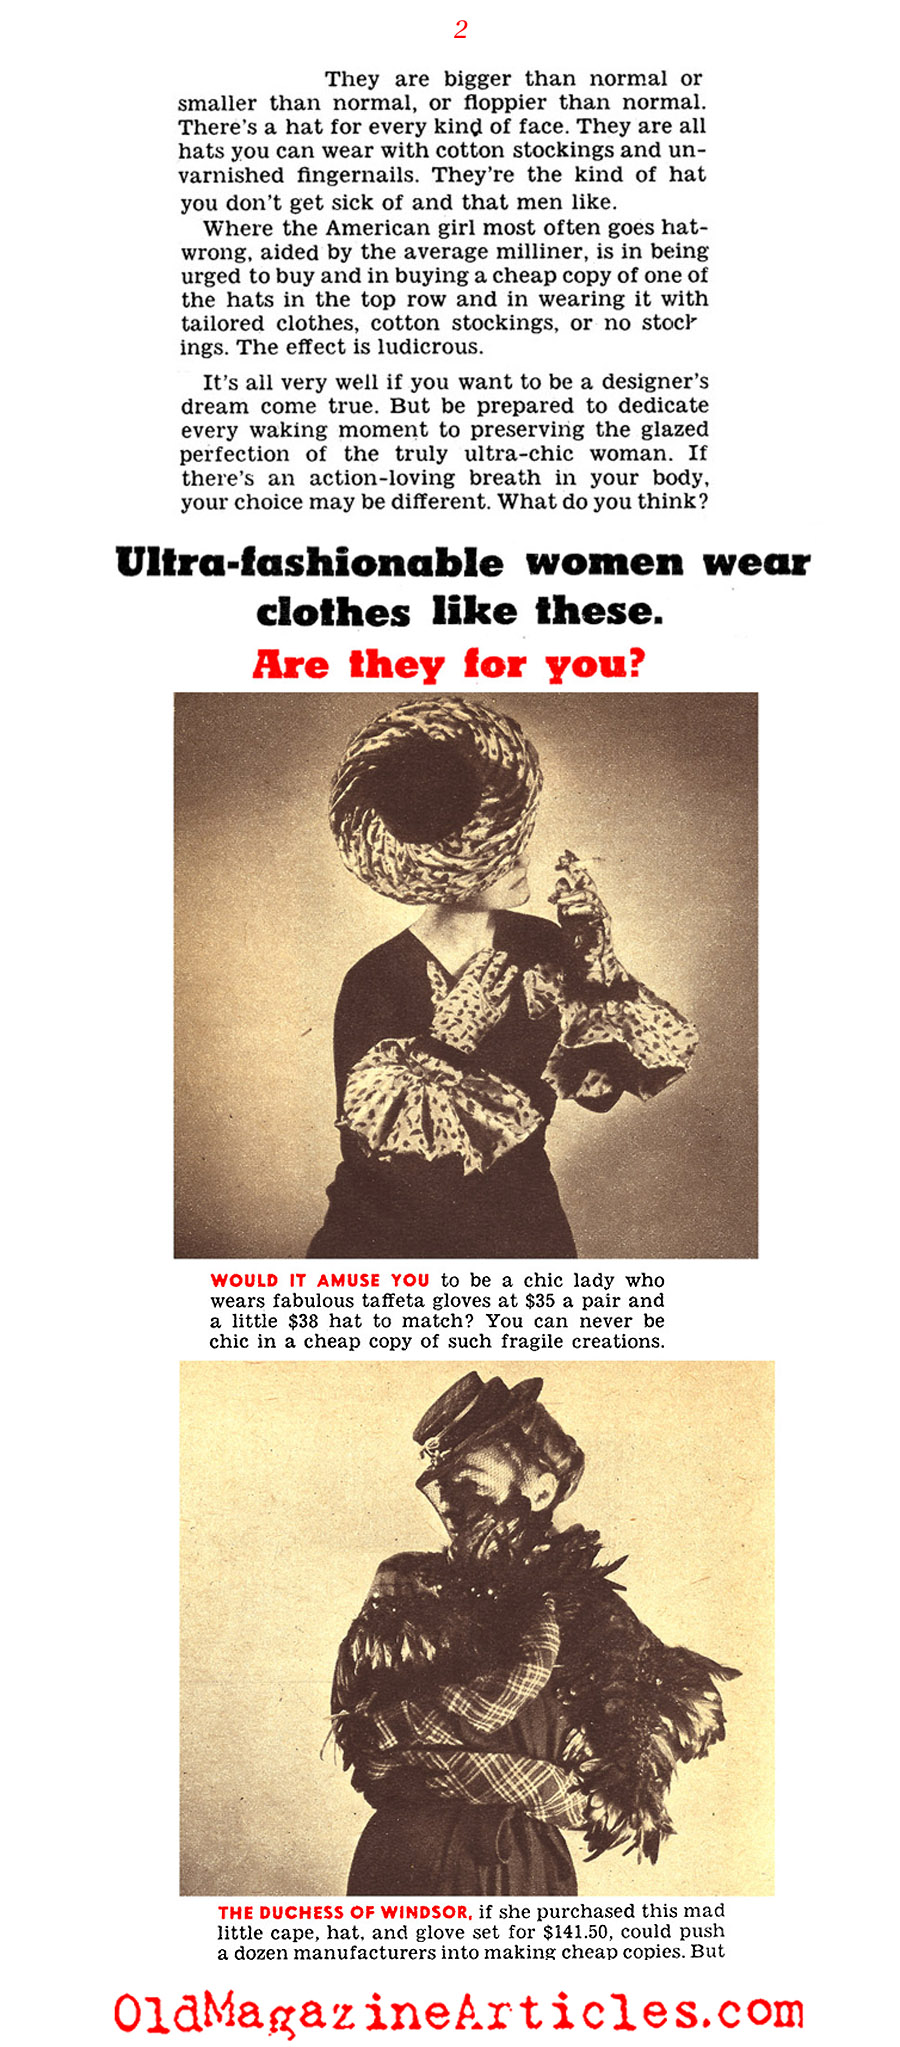 John Frederics and the Hats for the Fall  (Click Magazine, 1942)